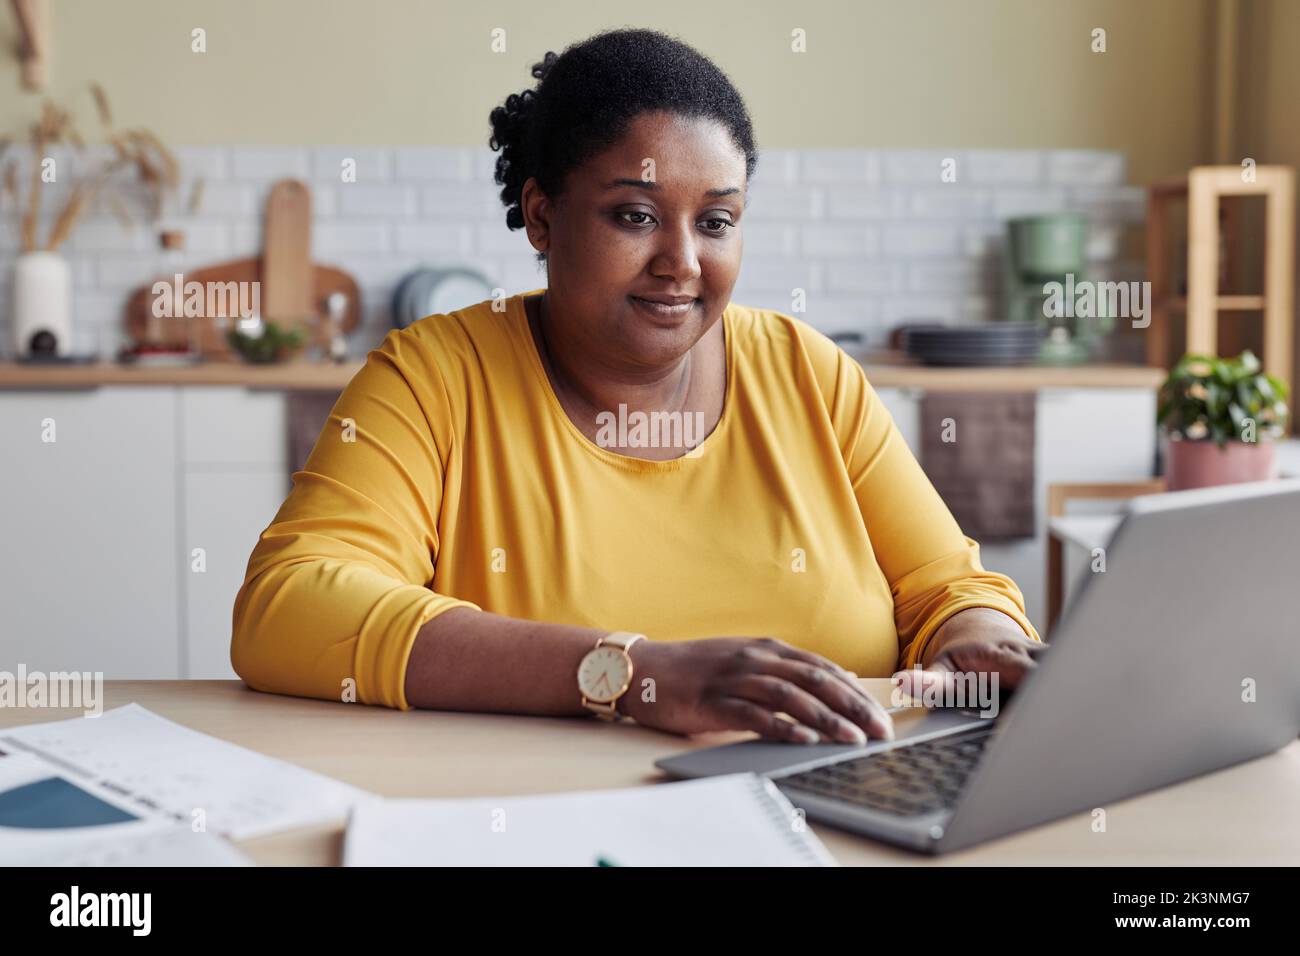 Smiling black young woman doing business while working from home Stock Photo